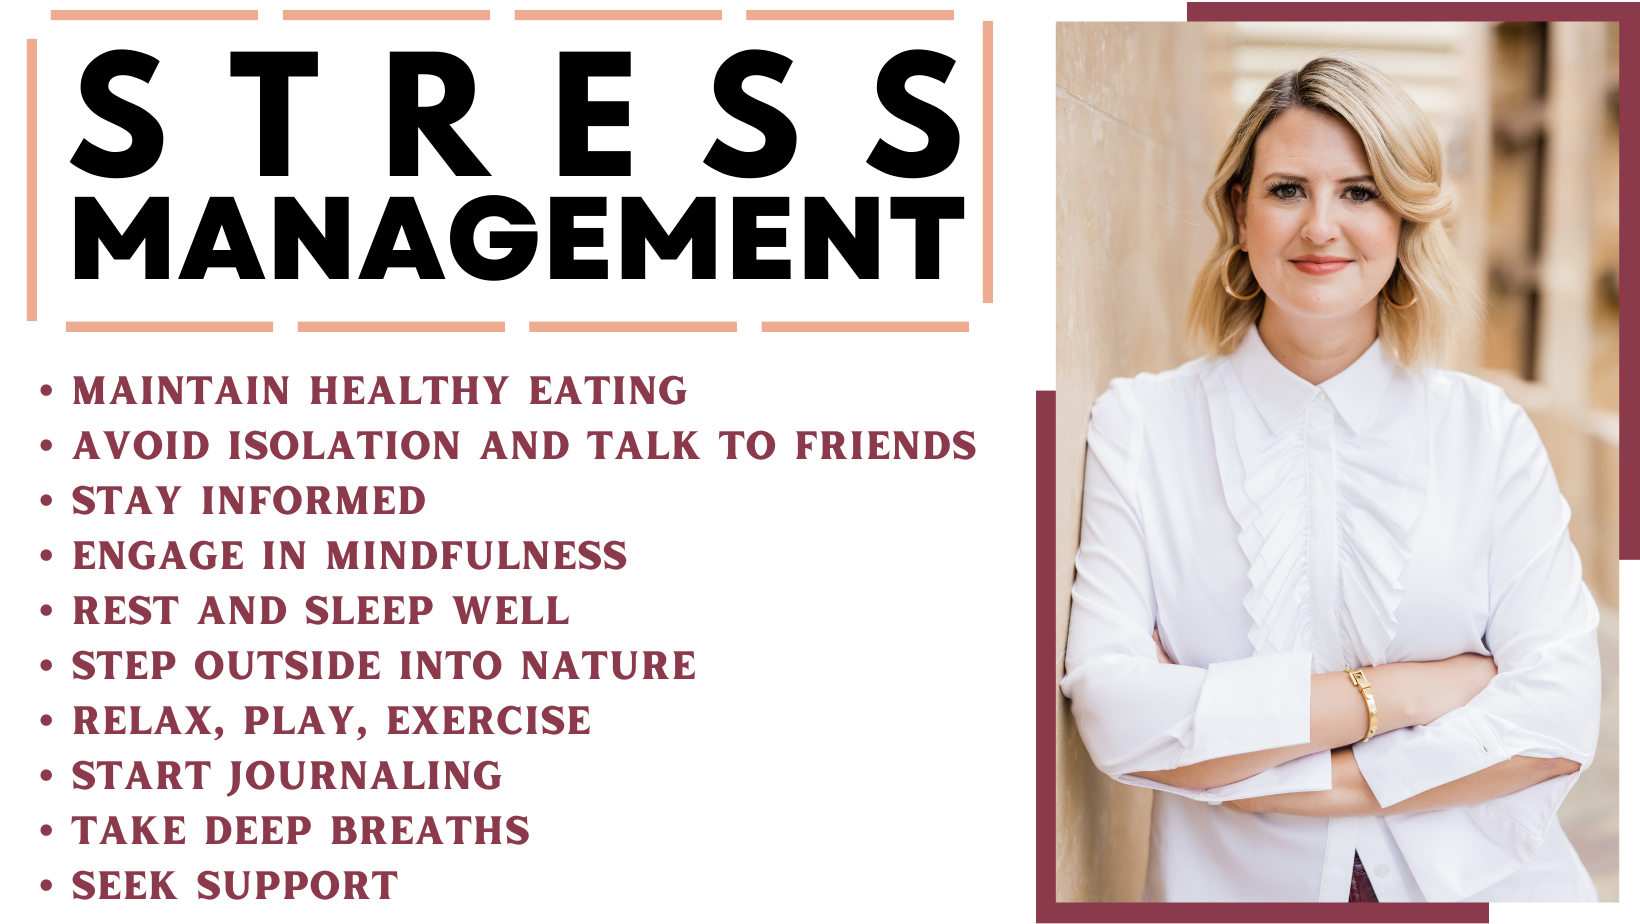 Stress Management - Reduce and Relieve Stress - Chandigarh